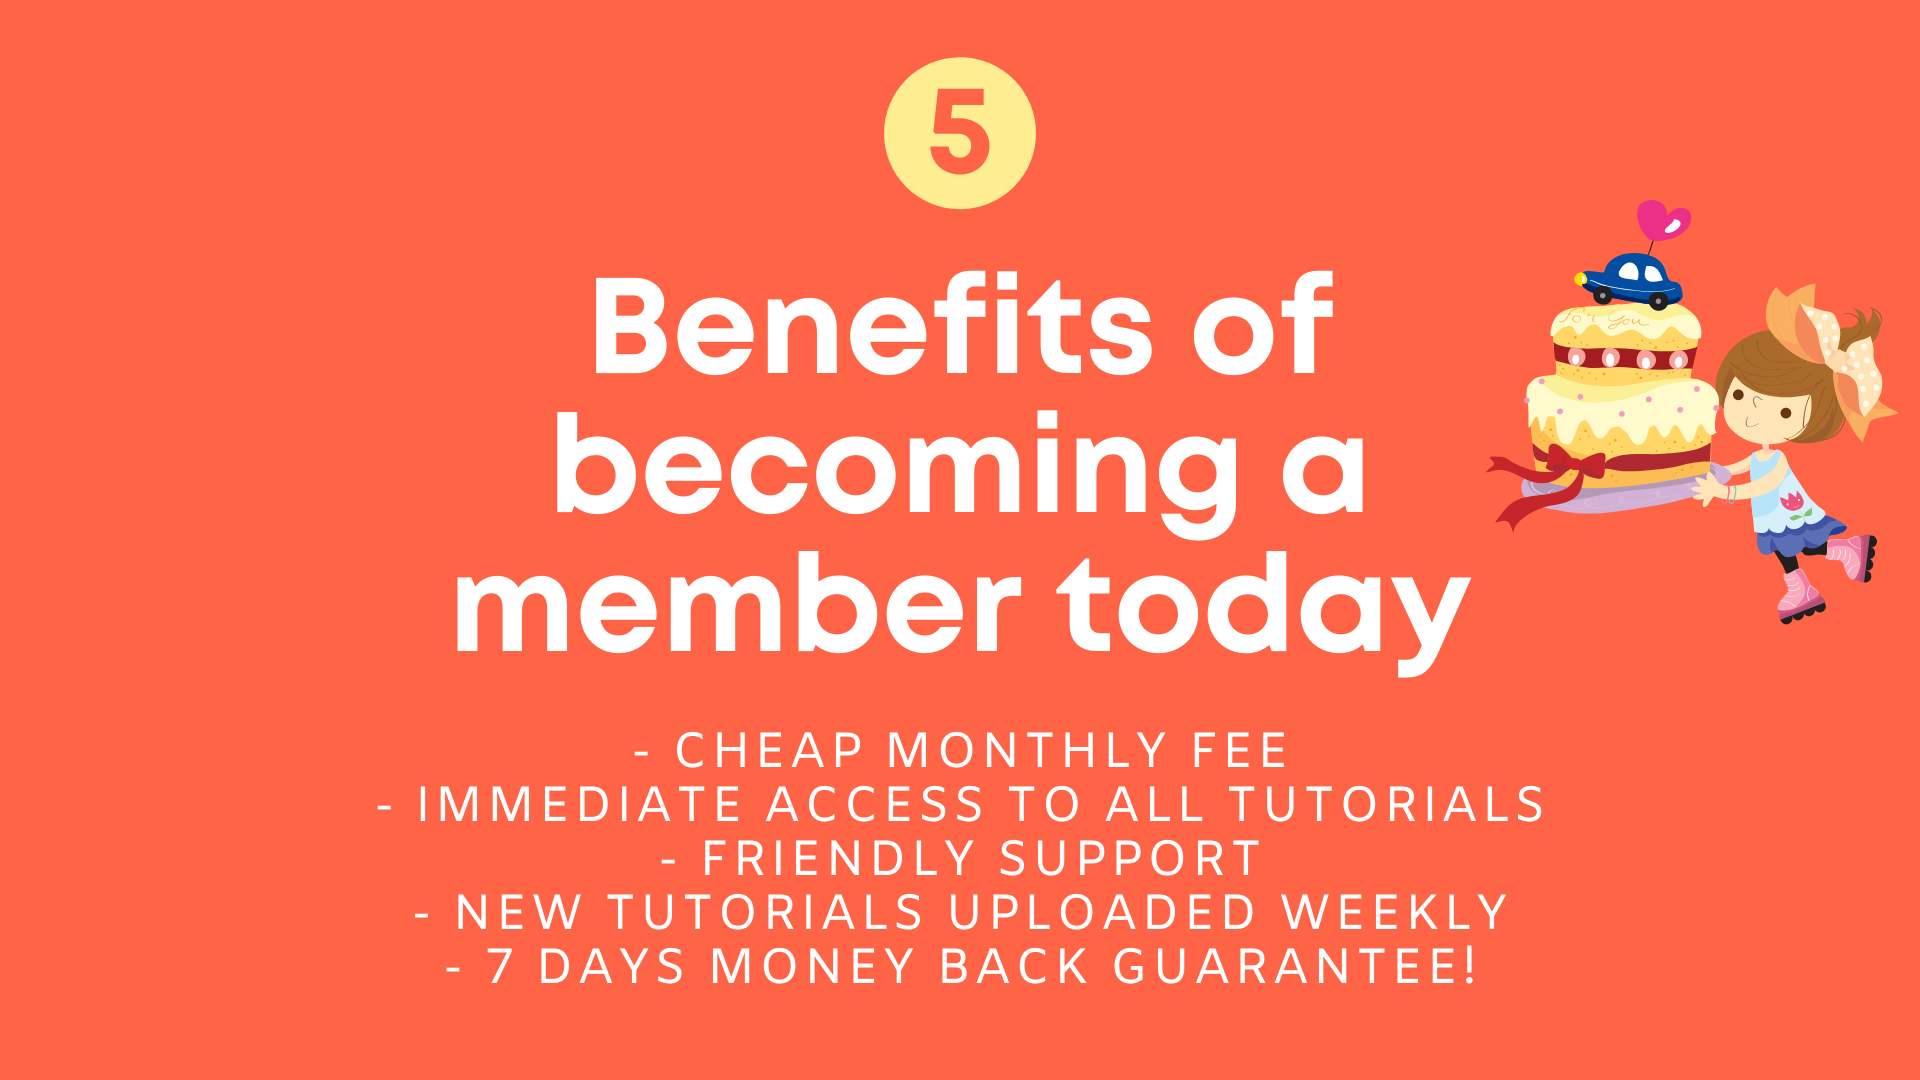 Benefits of becoming a member today